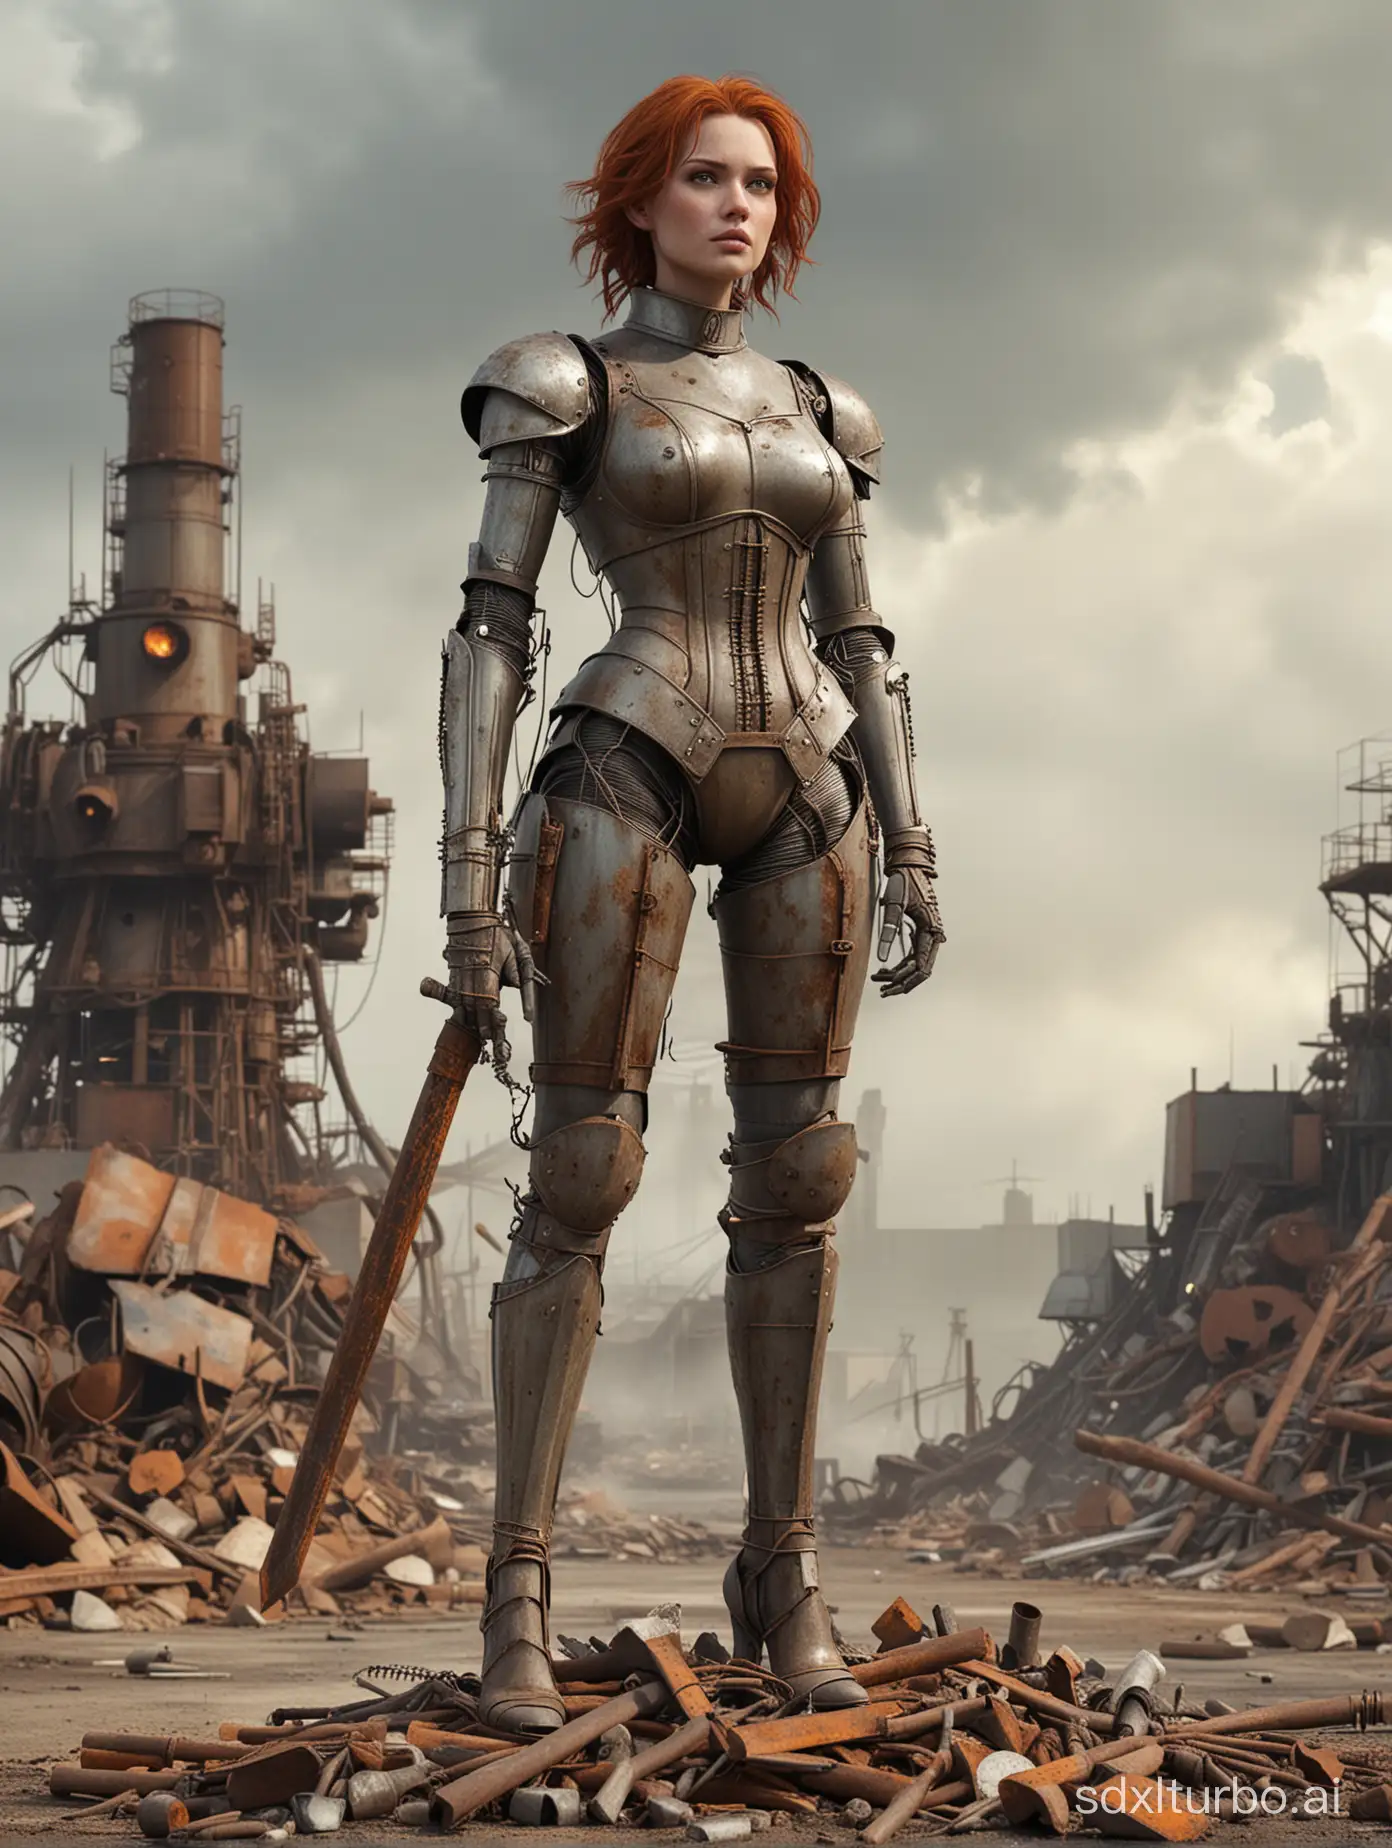 A rusty female Tin woman character in metal stilettos with large rusty metal breasts and female curves hair is made of cables and wire and looks similar to the Tin Man from The Wizard of Oz is standing full body shot holding a rust sword upright like Joan of Arc, she is rusted and abandoned at a pile of rusty scrap metal parts ready to be incinerated in a blast furnace. 
THE sky is hazy gloomy brown with polluted sulfur gasses. A highly realistic clear high resolution photo rendering.